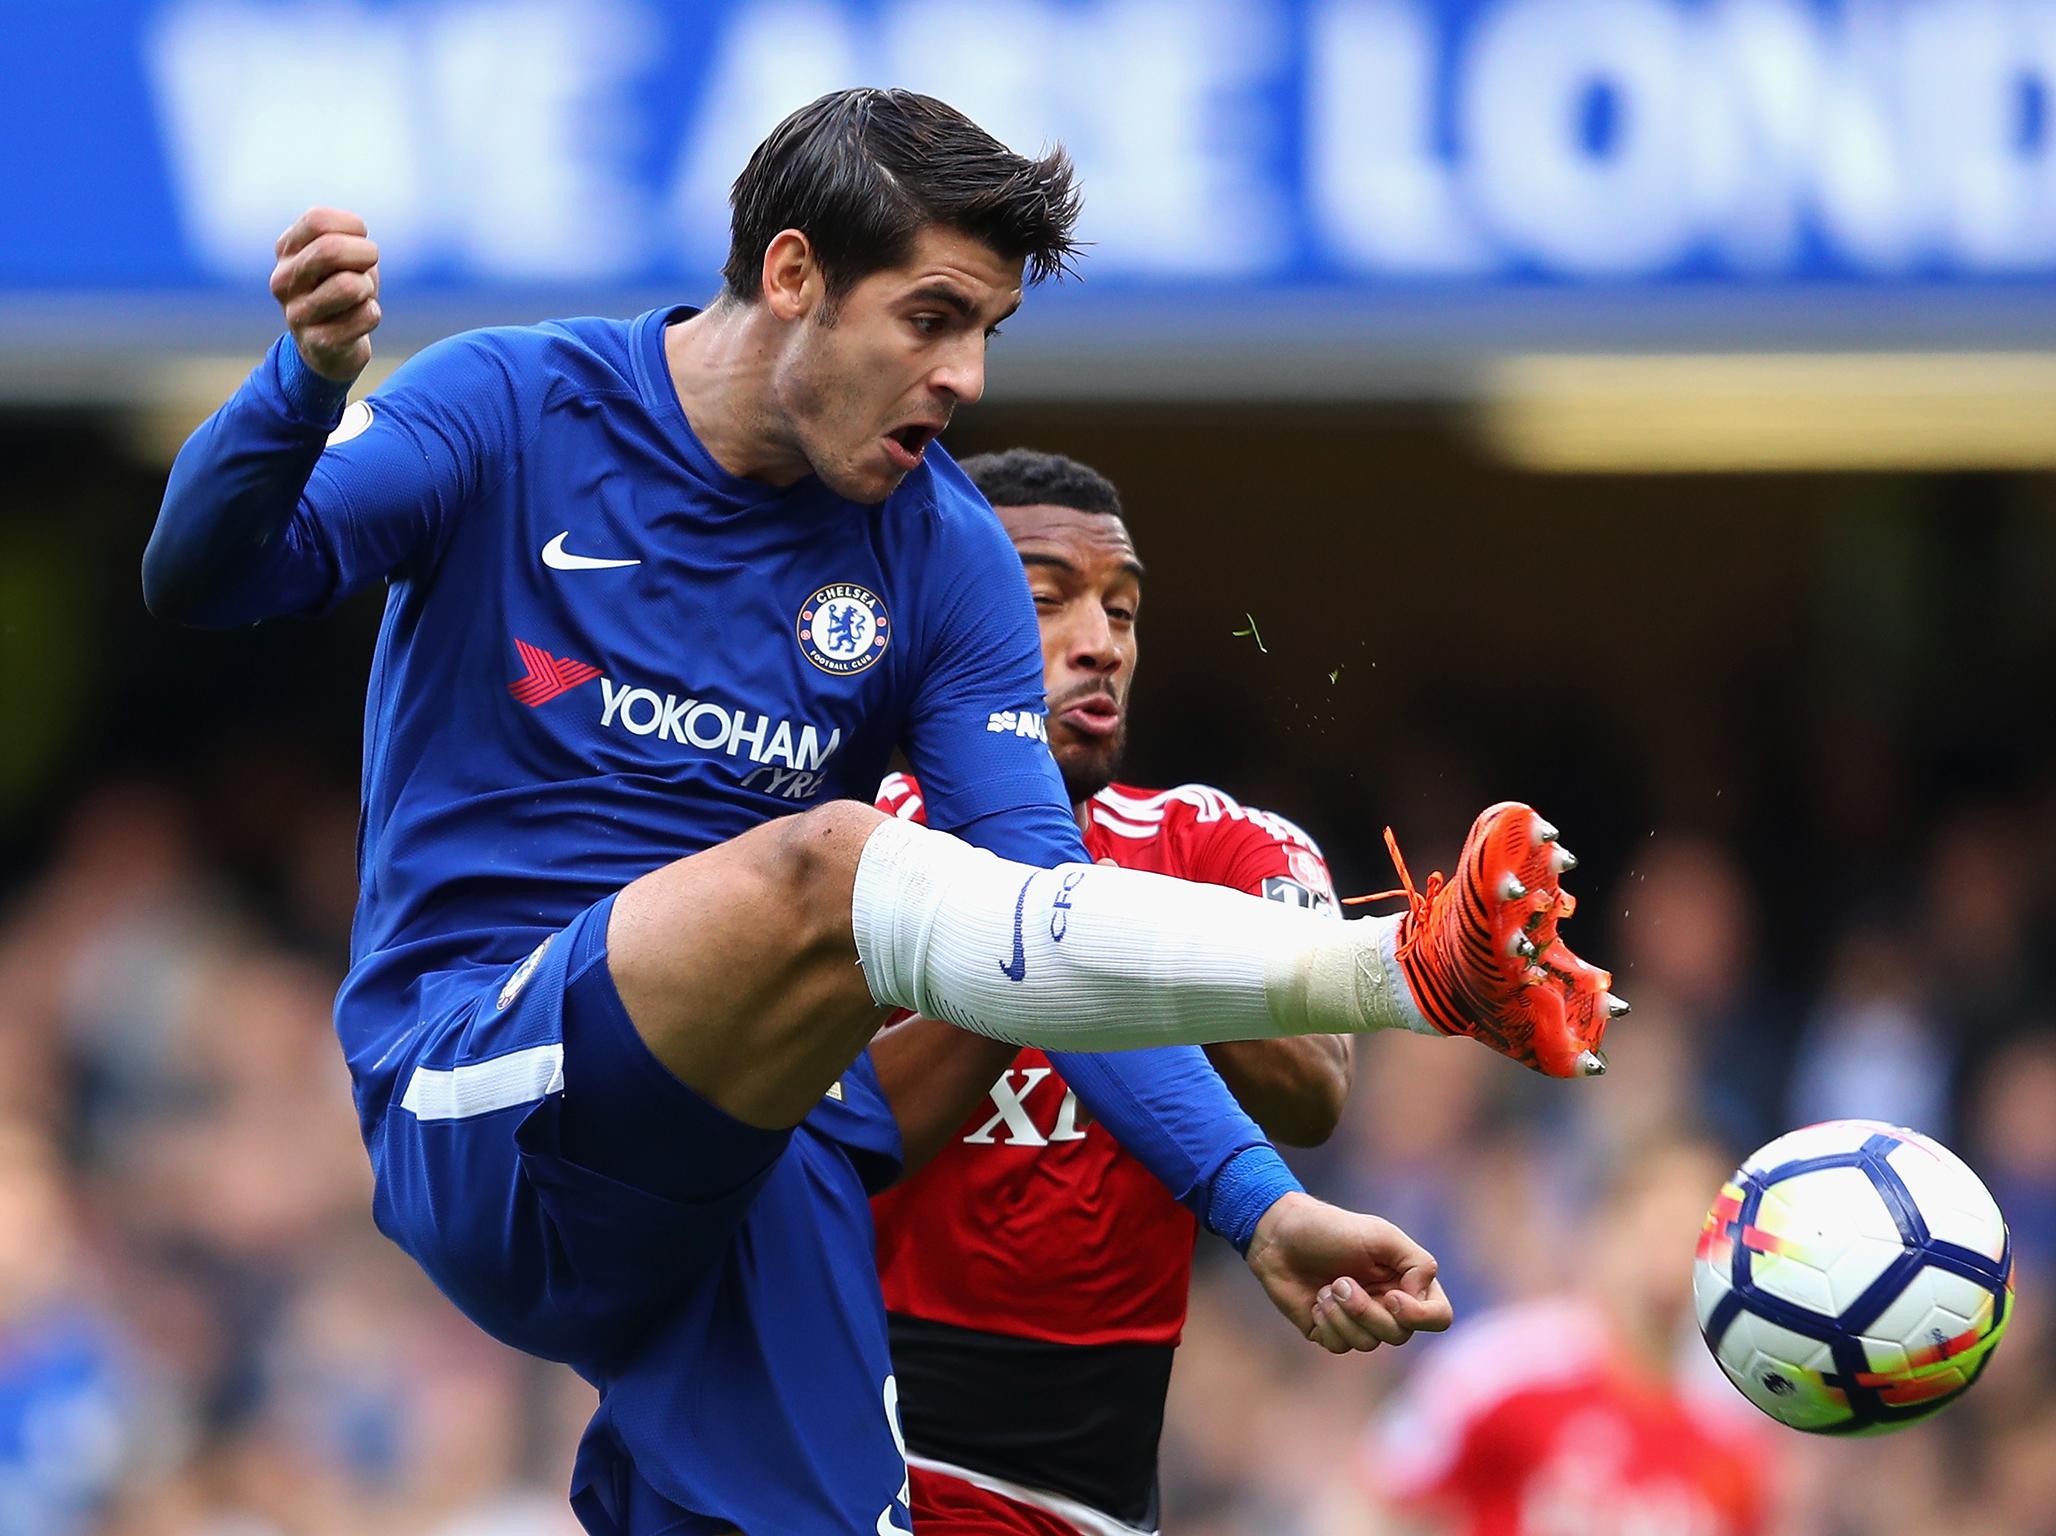 Morata frequently looked isolated